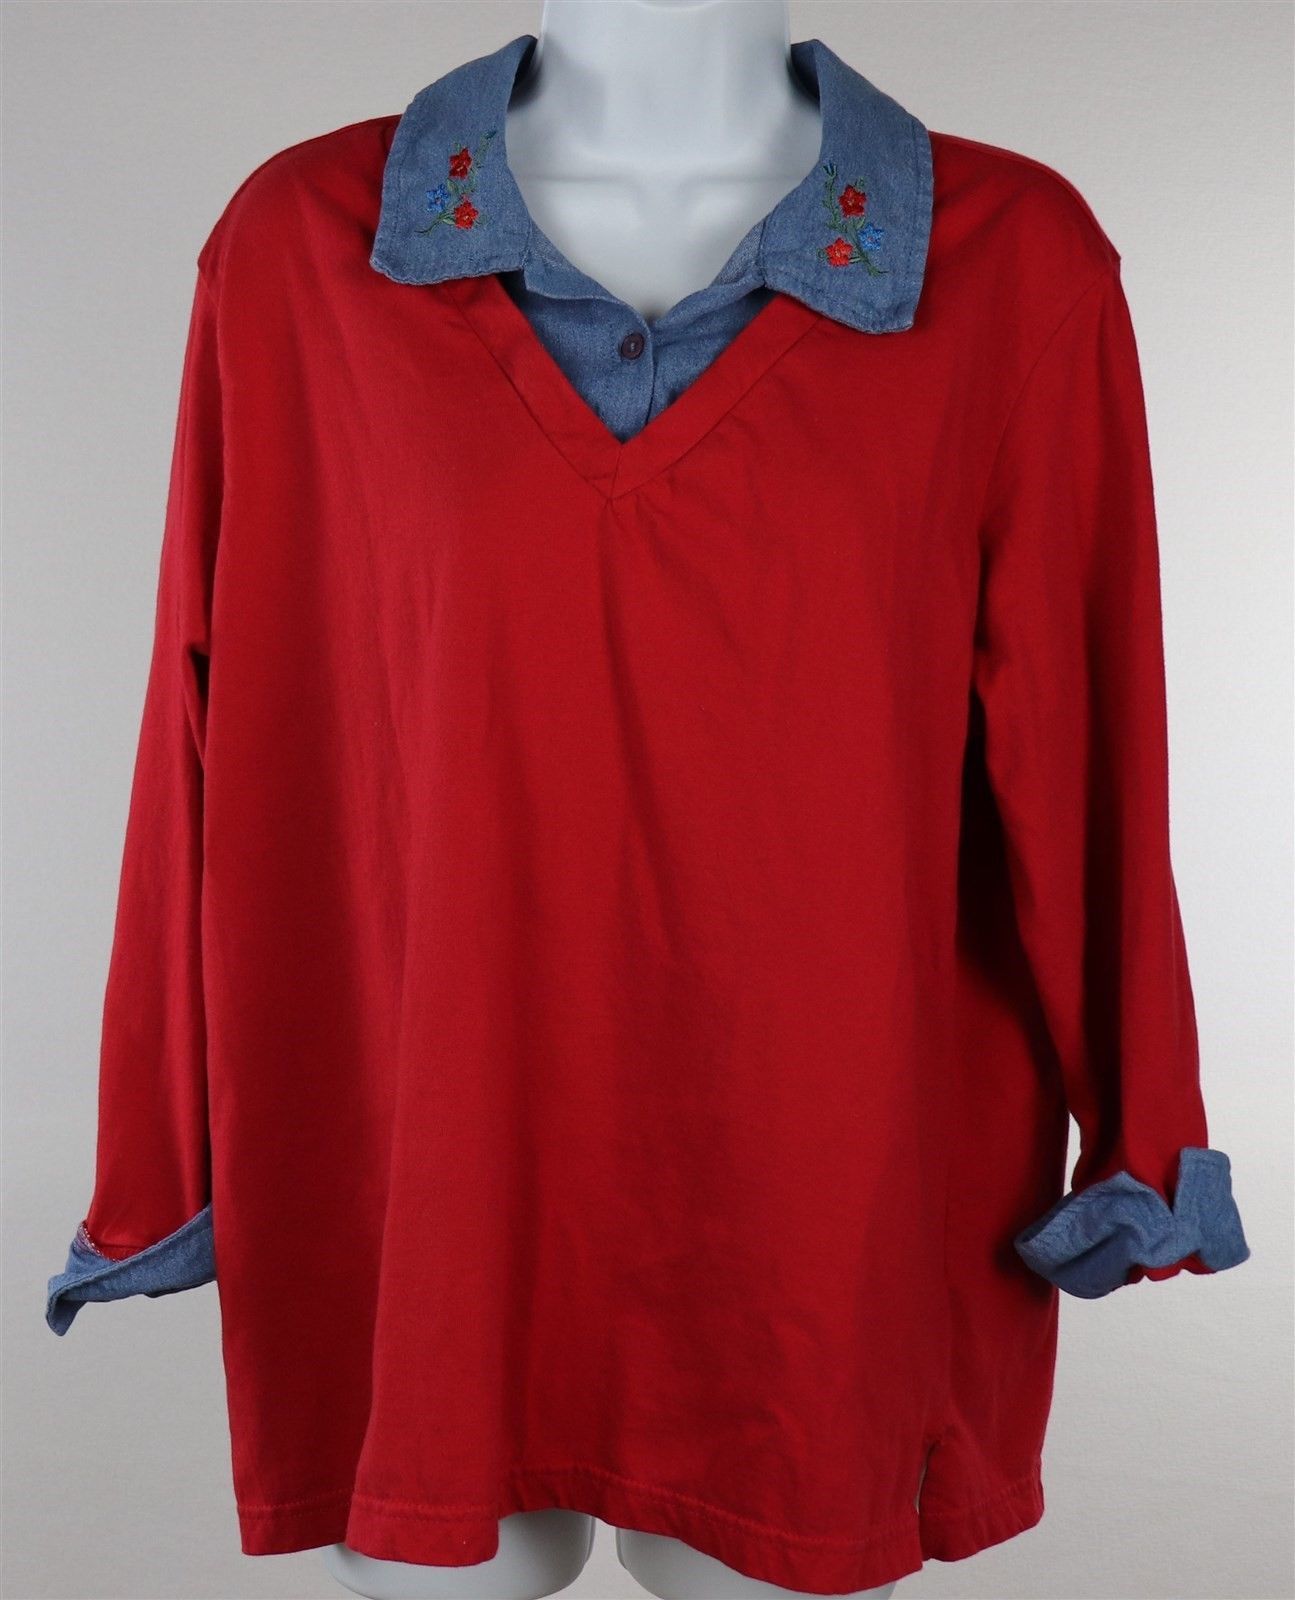 Blair Womens Embroidered Flower Blouse Shirt Size XLG - Tops & Blouses